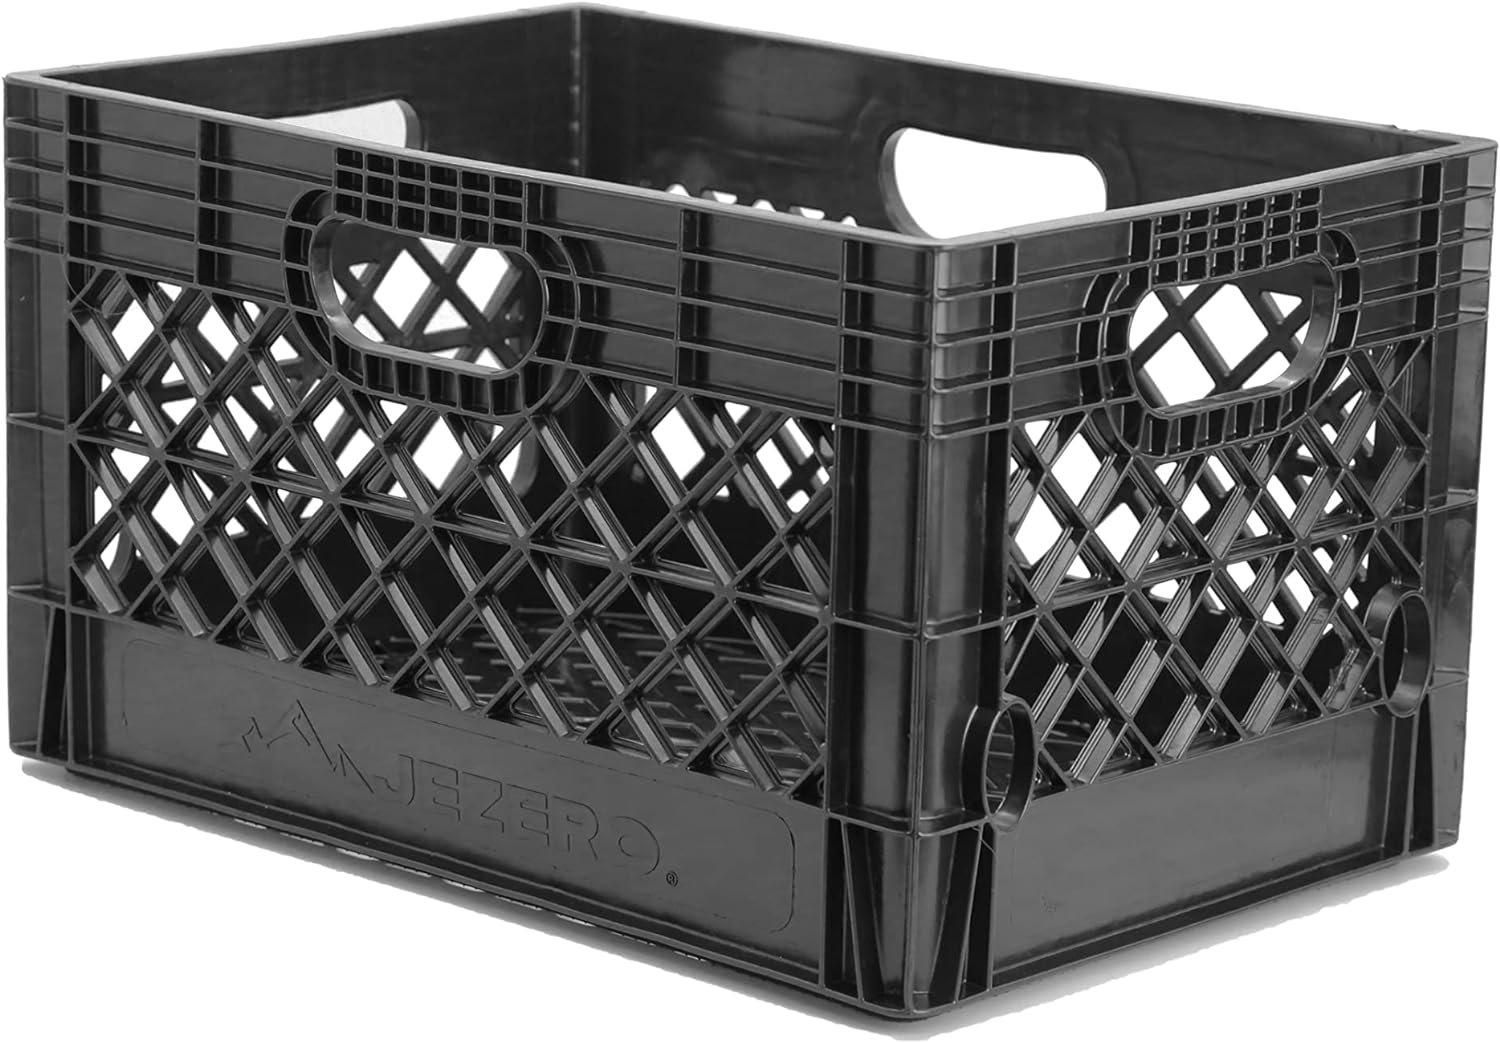 Milk Crate for Household Storage Review